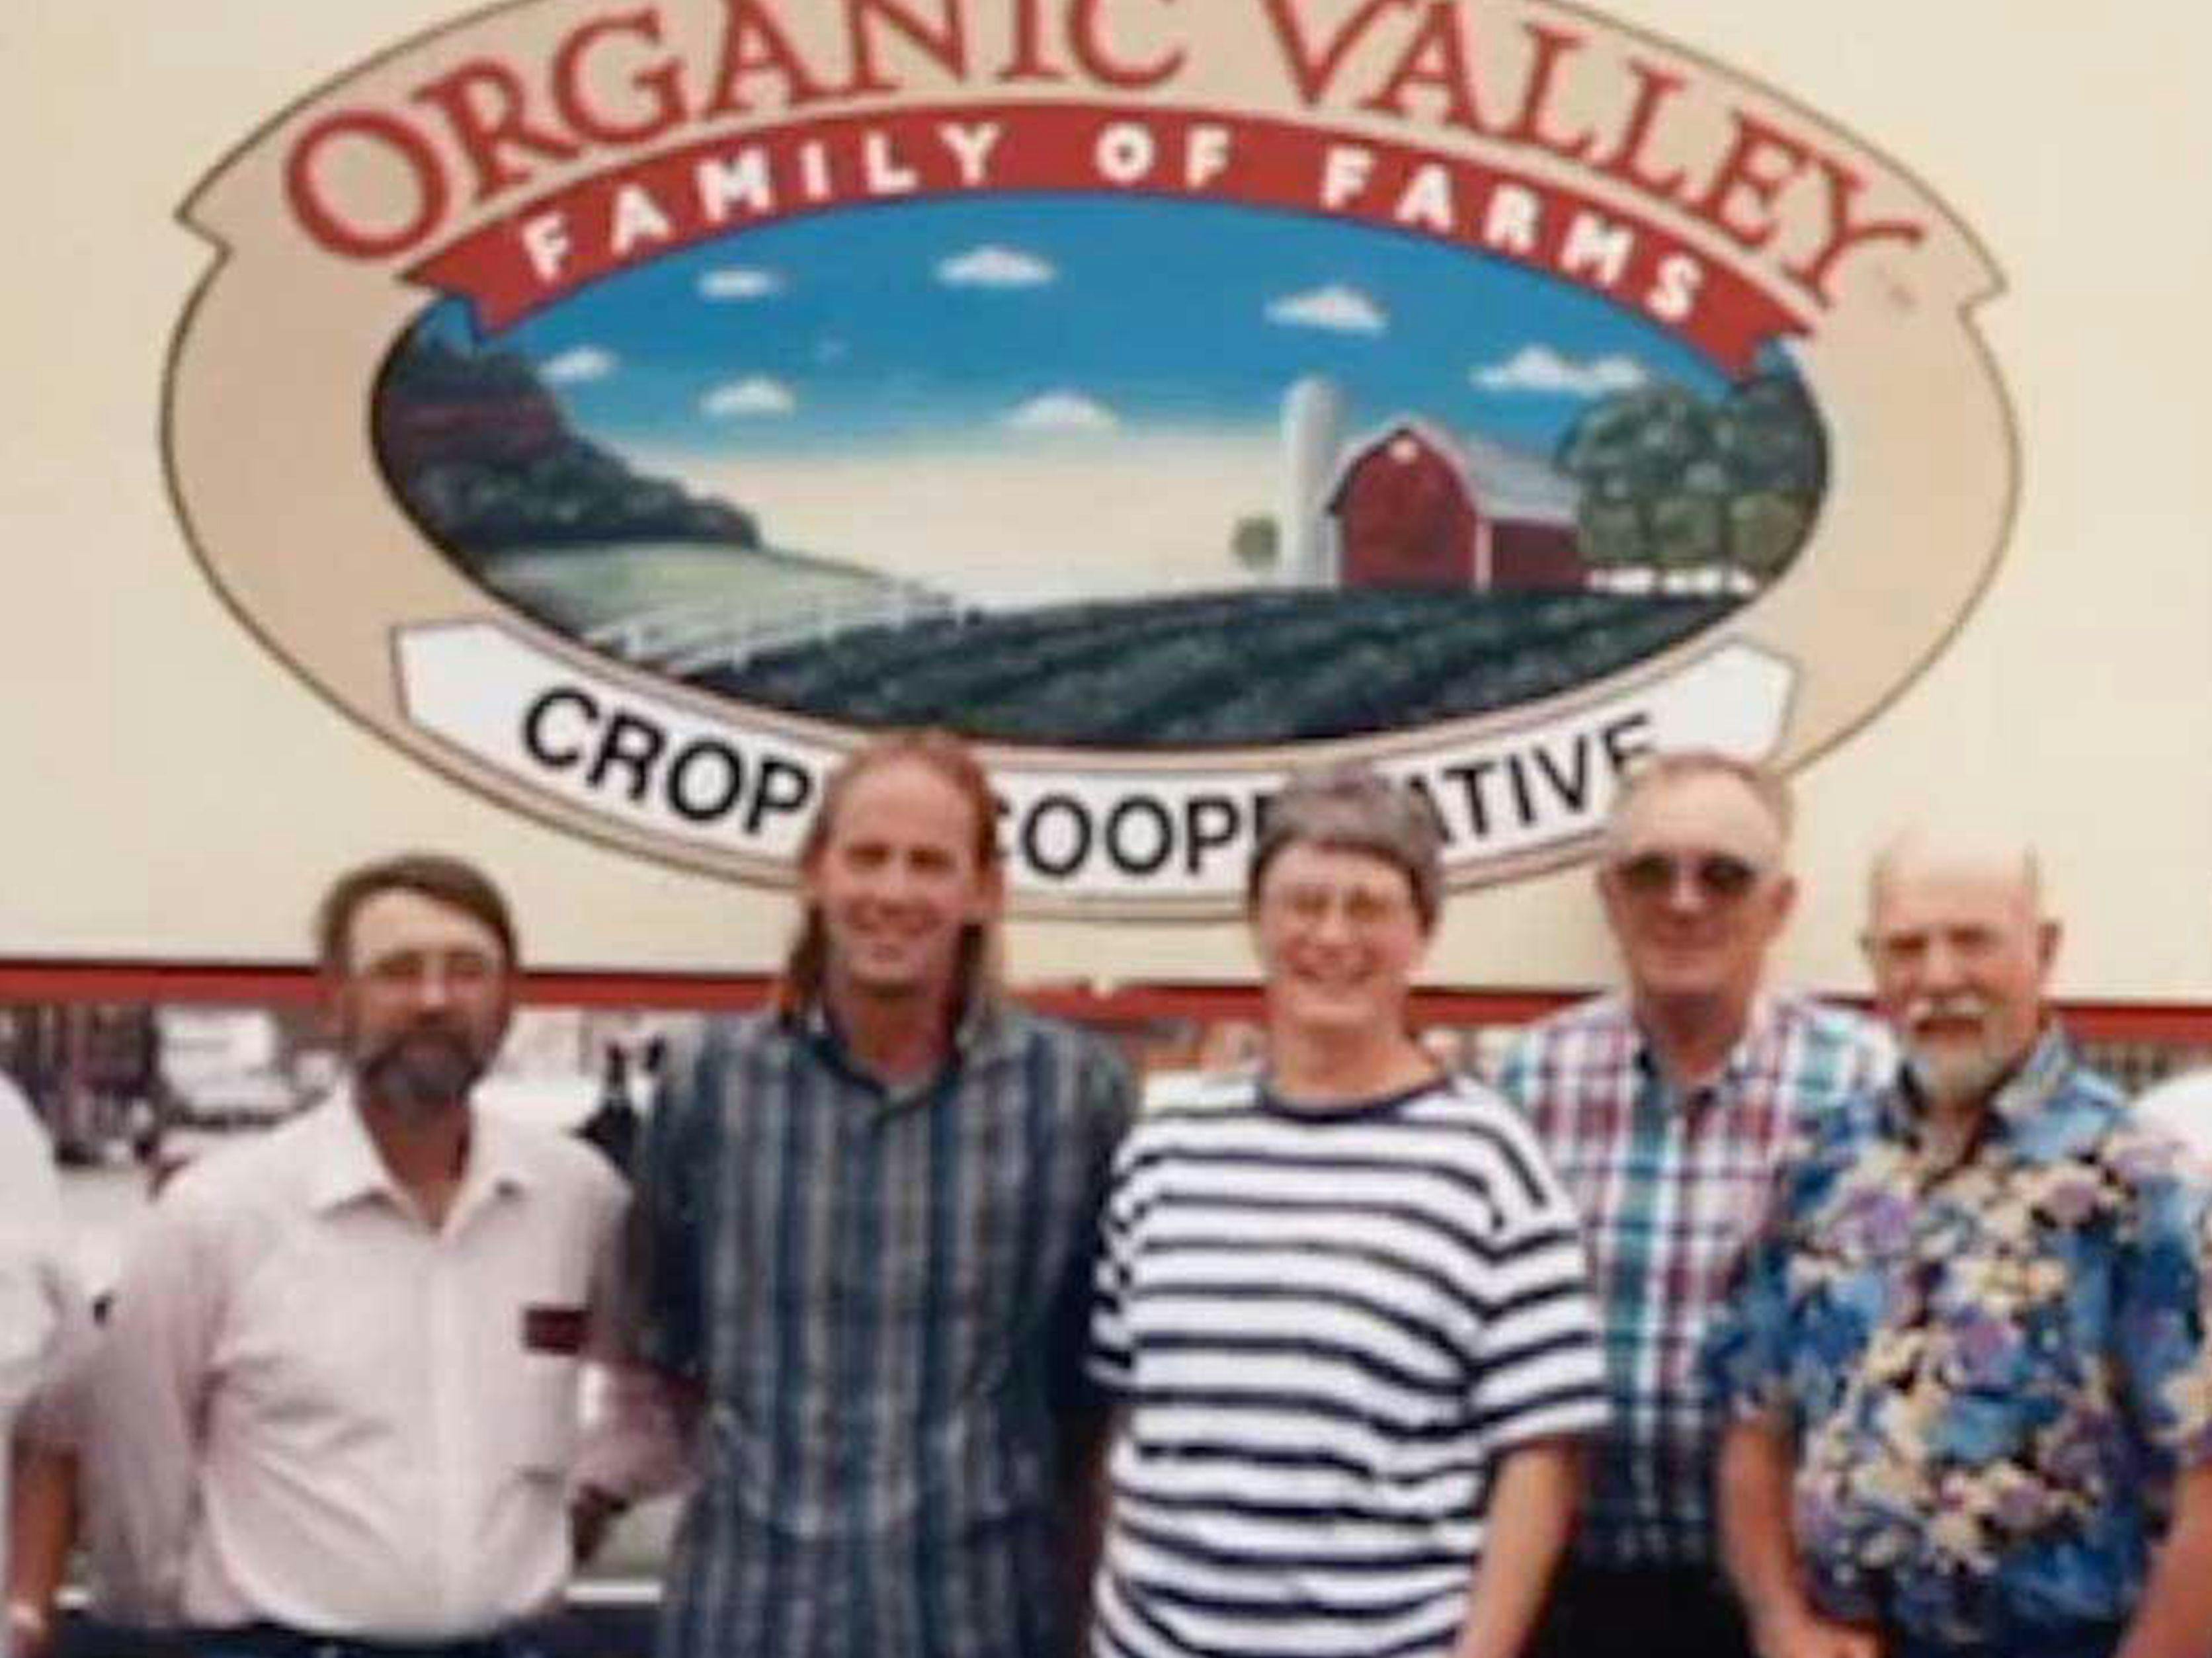 An early photo of Organic Valley's Board of Directors.